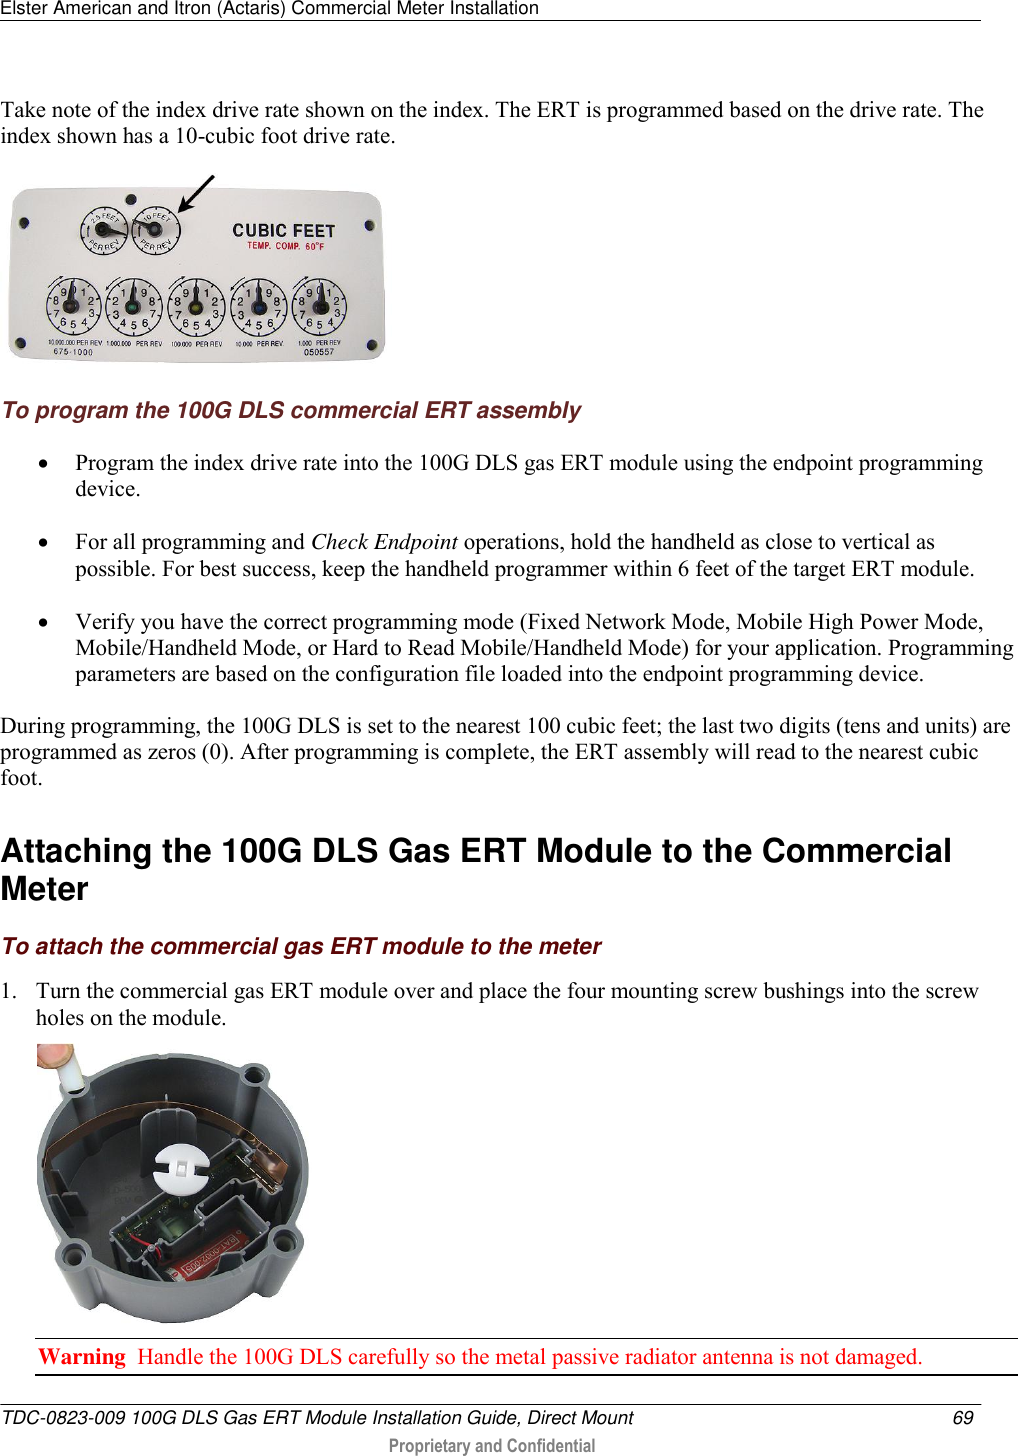 Elster American and Itron (Actaris) Commercial Meter Installation   TDC-0823-009 100G DLS Gas ERT Module Installation Guide, Direct Mount  69   Proprietary and Confidential     Take note of the index drive rate shown on the index. The ERT is programmed based on the drive rate. The index shown has a 10-cubic foot drive rate.  To program the 100G DLS commercial ERT assembly  Program the index drive rate into the 100G DLS gas ERT module using the endpoint programming device.   For all programming and Check Endpoint operations, hold the handheld as close to vertical as possible. For best success, keep the handheld programmer within 6 feet of the target ERT module.  Verify you have the correct programming mode (Fixed Network Mode, Mobile High Power Mode, Mobile/Handheld Mode, or Hard to Read Mobile/Handheld Mode) for your application. Programming parameters are based on the configuration file loaded into the endpoint programming device.  During programming, the 100G DLS is set to the nearest 100 cubic feet; the last two digits (tens and units) are programmed as zeros (0). After programming is complete, the ERT assembly will read to the nearest cubic foot.   Attaching the 100G DLS Gas ERT Module to the Commercial Meter To attach the commercial gas ERT module to the meter 1. Turn the commercial gas ERT module over and place the four mounting screw bushings into the screw holes on the module.   Warning  Handle the 100G DLS carefully so the metal passive radiator antenna is not damaged. 